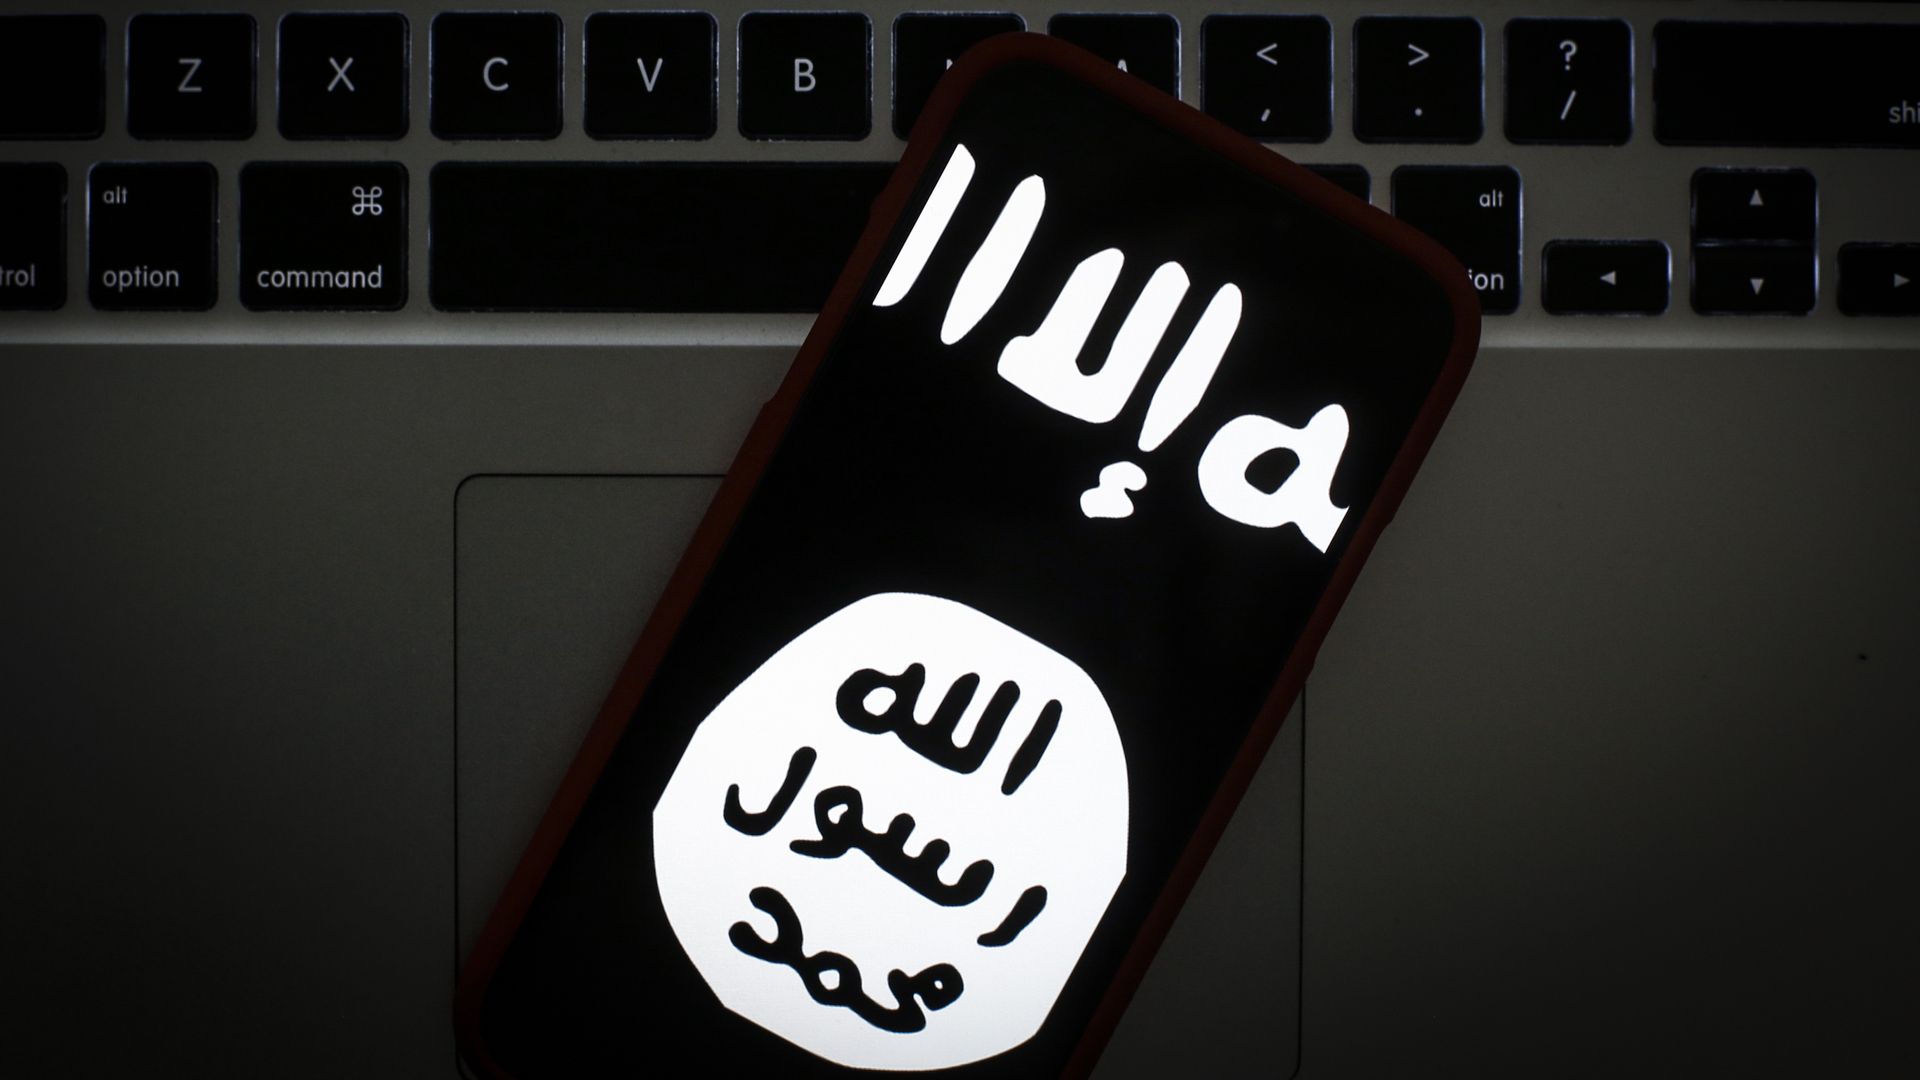 Photo of a phone screen showing the black and white ISIS logo as it rests on a keyboard